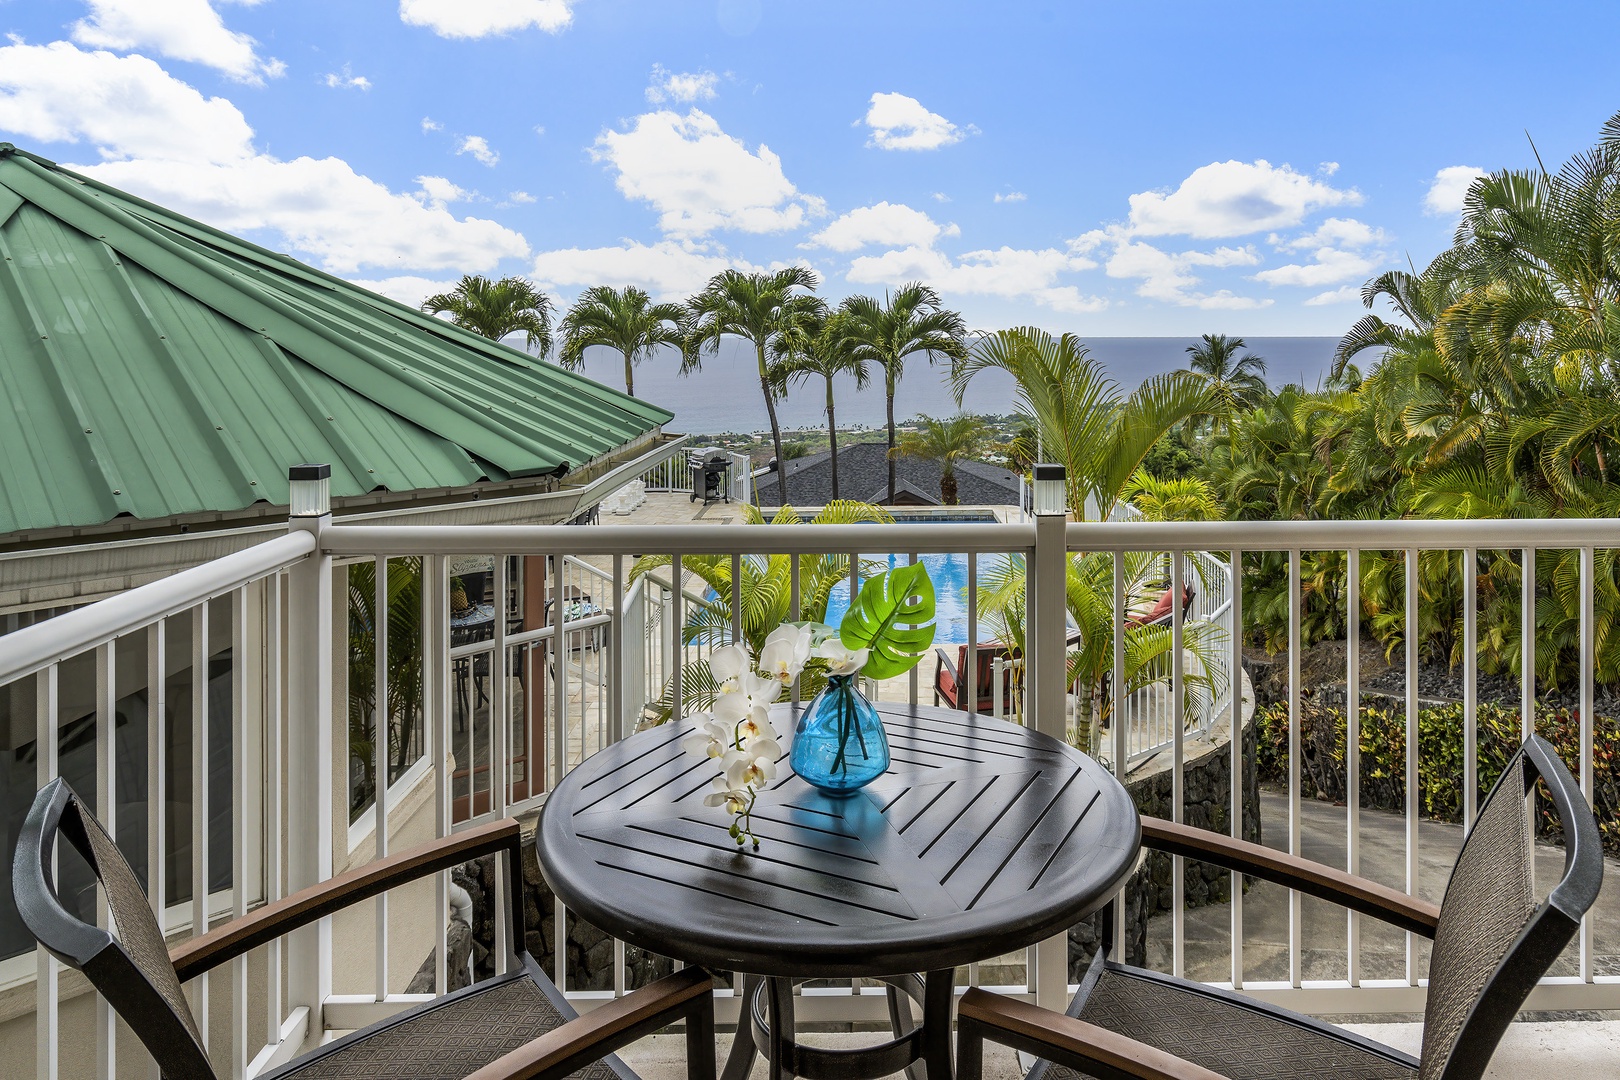 Kailua-Kona Vacation Rentals, Honu Hale - Lanai shared with the two guest bedrooms